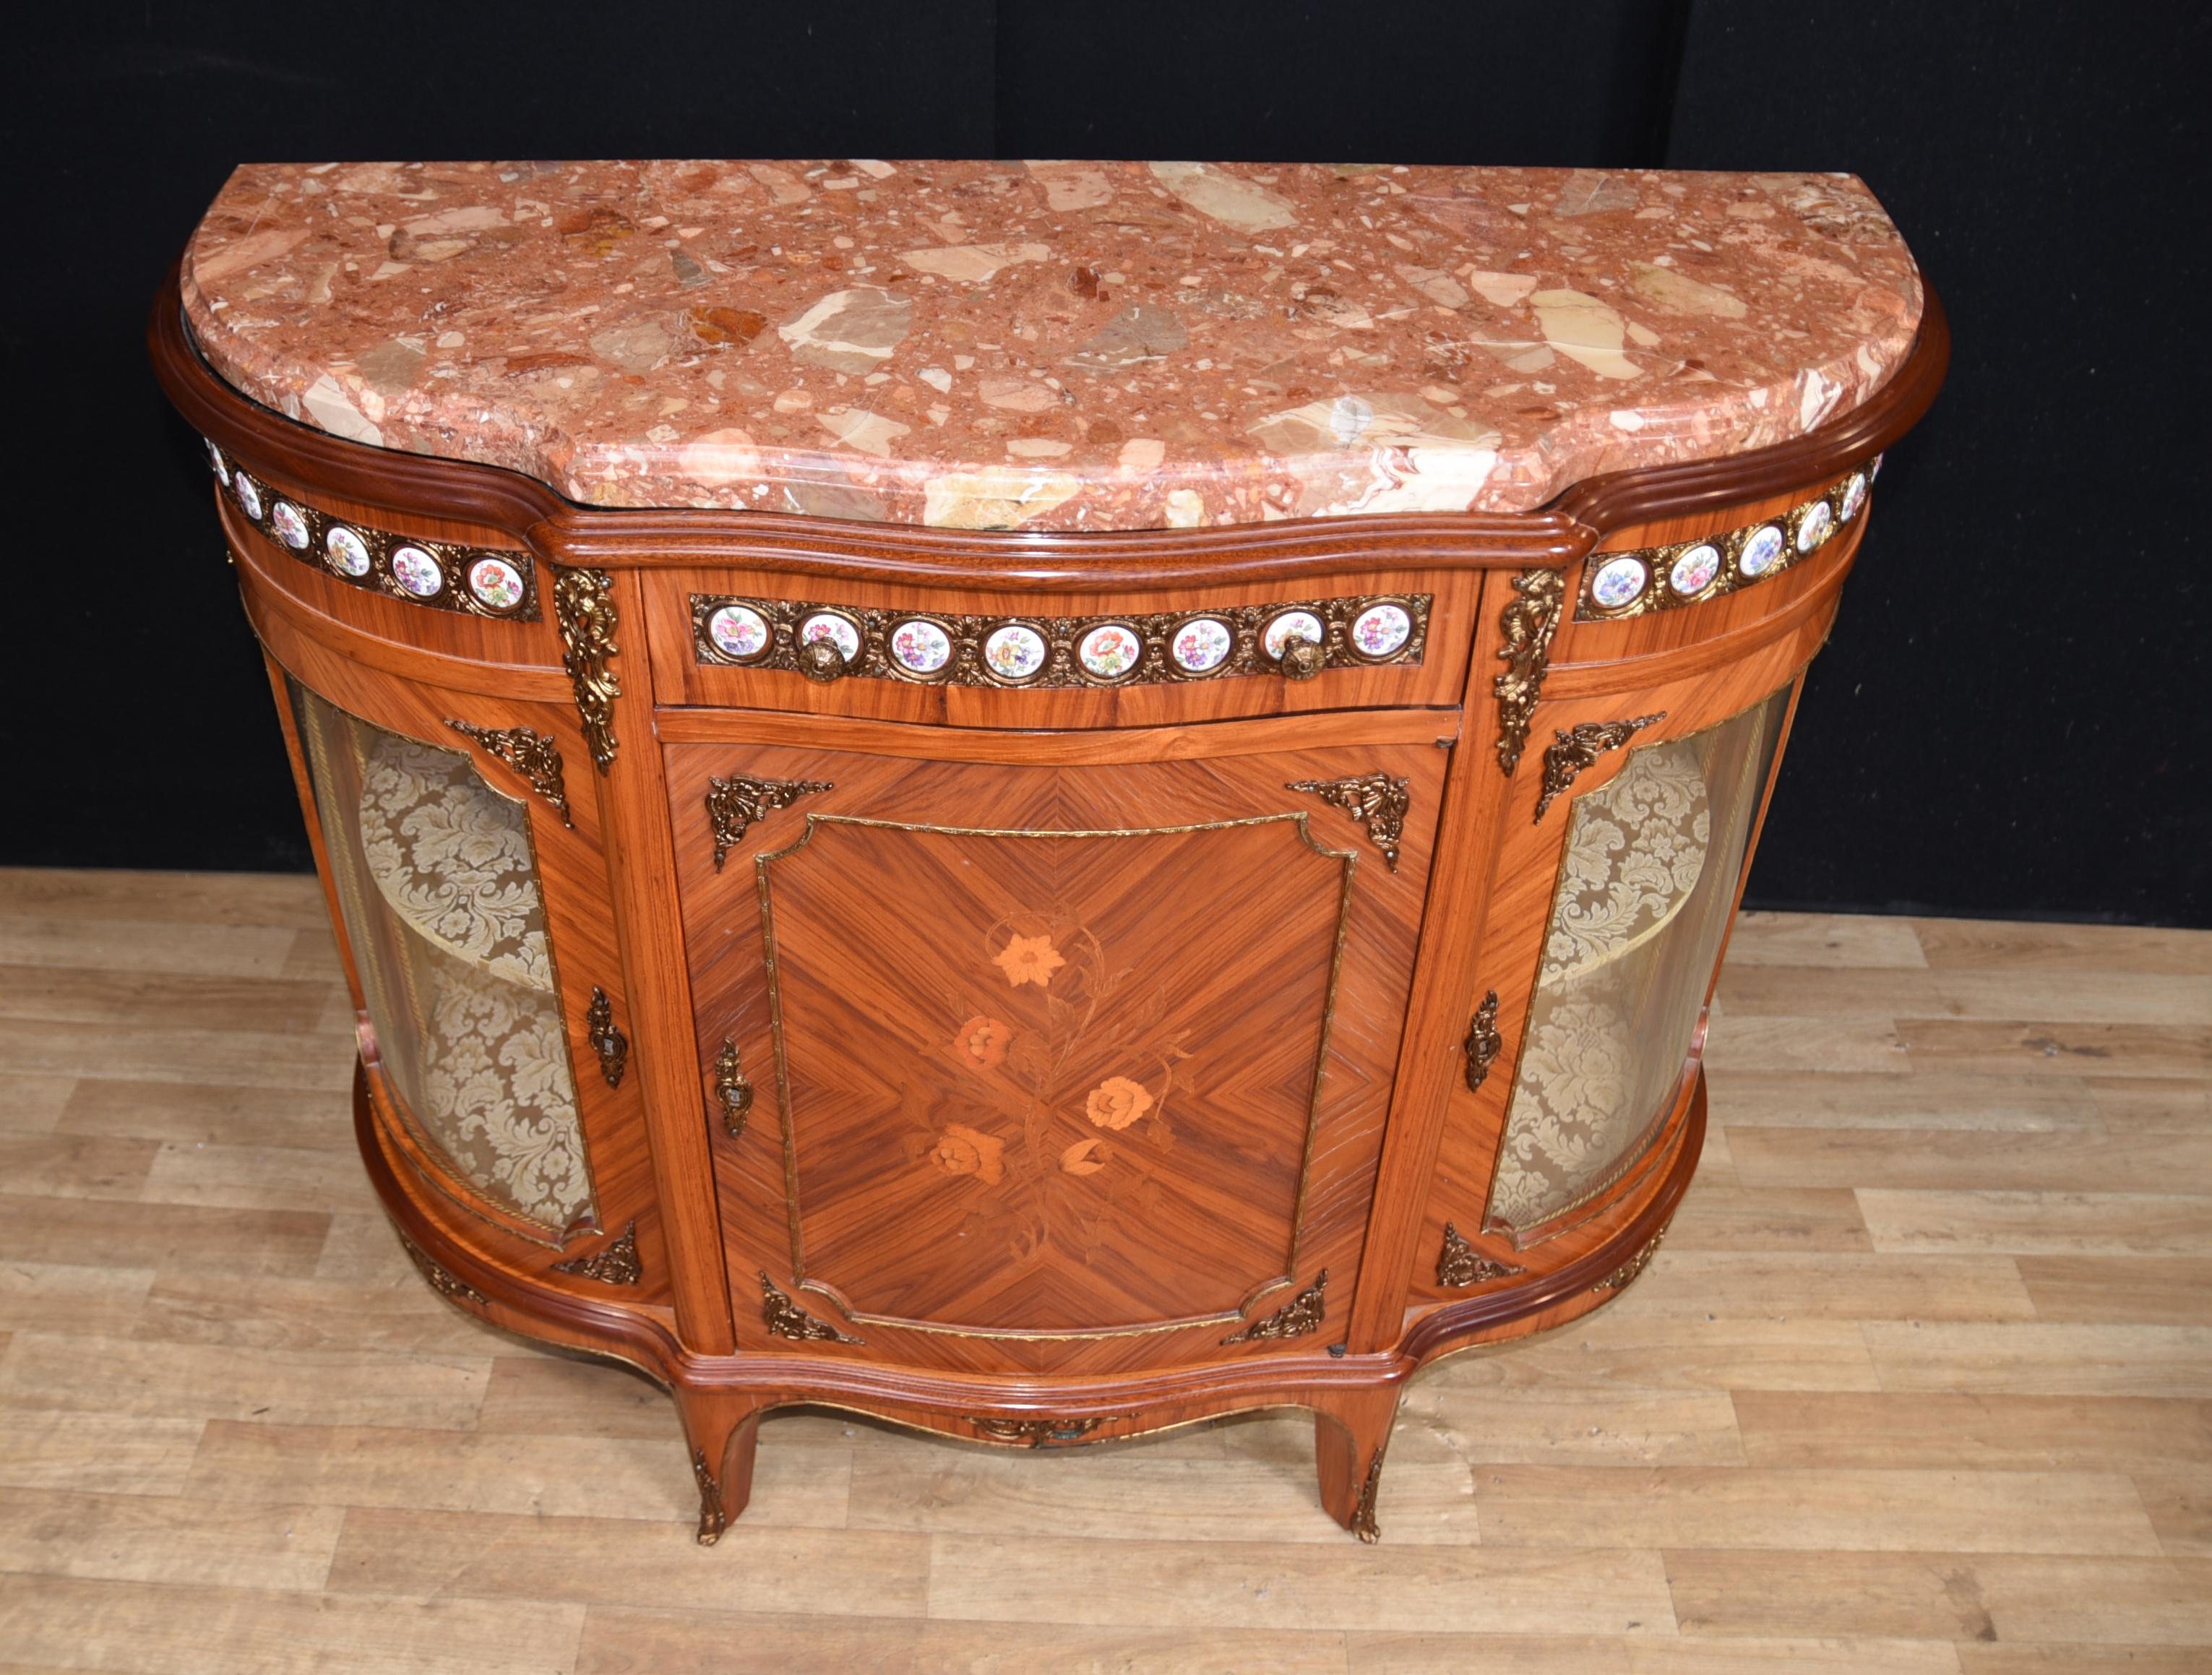 - Elegant antique French cabinet in light kingwood with porcelain plaques
- Also some gorgeous marquetry inlay work to the front showing floral motifs
- Love the grain and colour of the kingwood, excellent patina, pefectly matched by the smooth